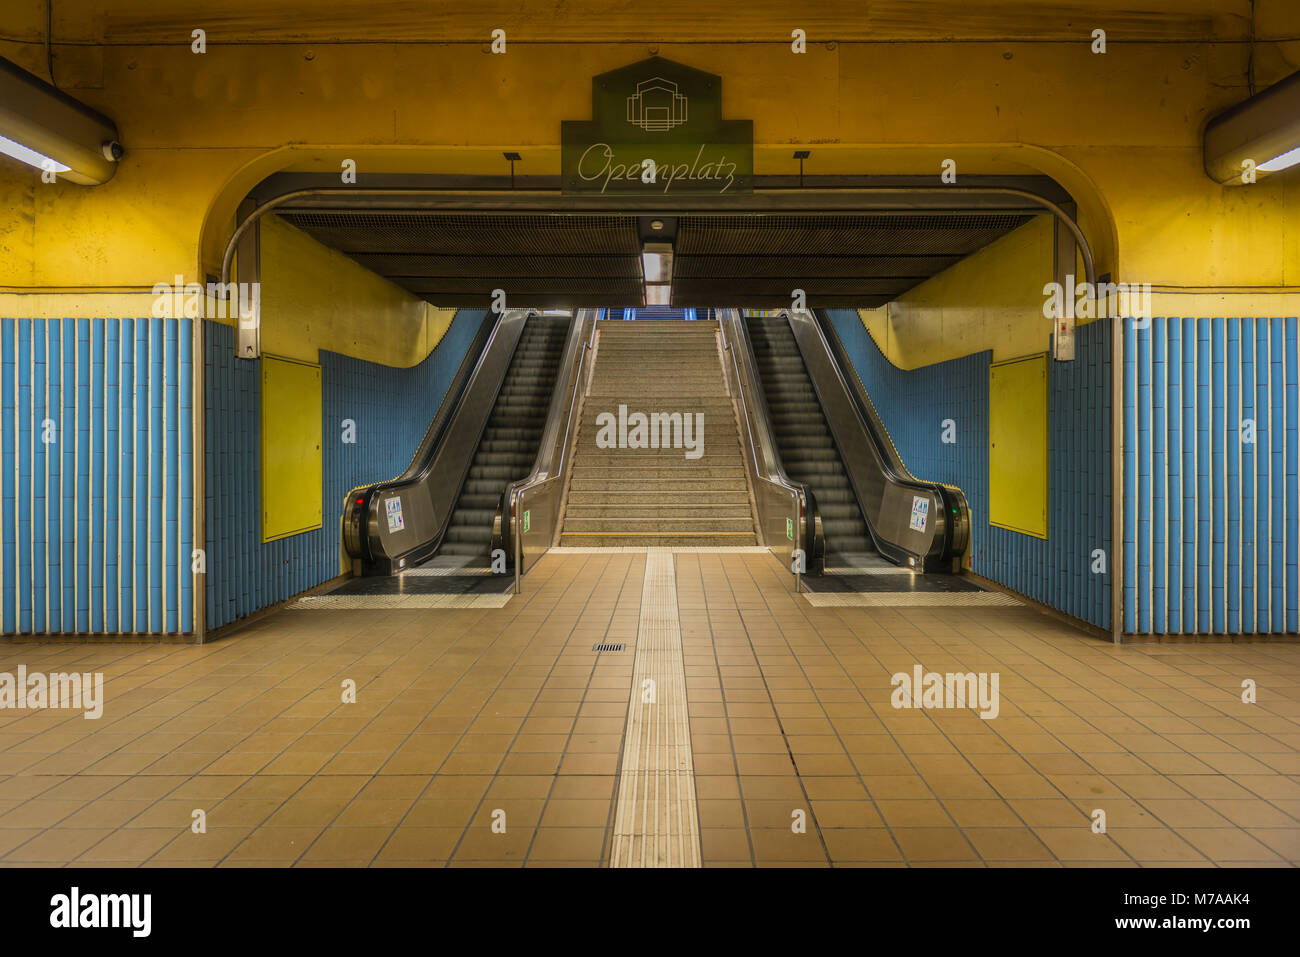 Access with stairs and escalators to the platform, subway station Opernplatz, Westend, Frankfurt am Main, Hesse, Germany Stock Photo